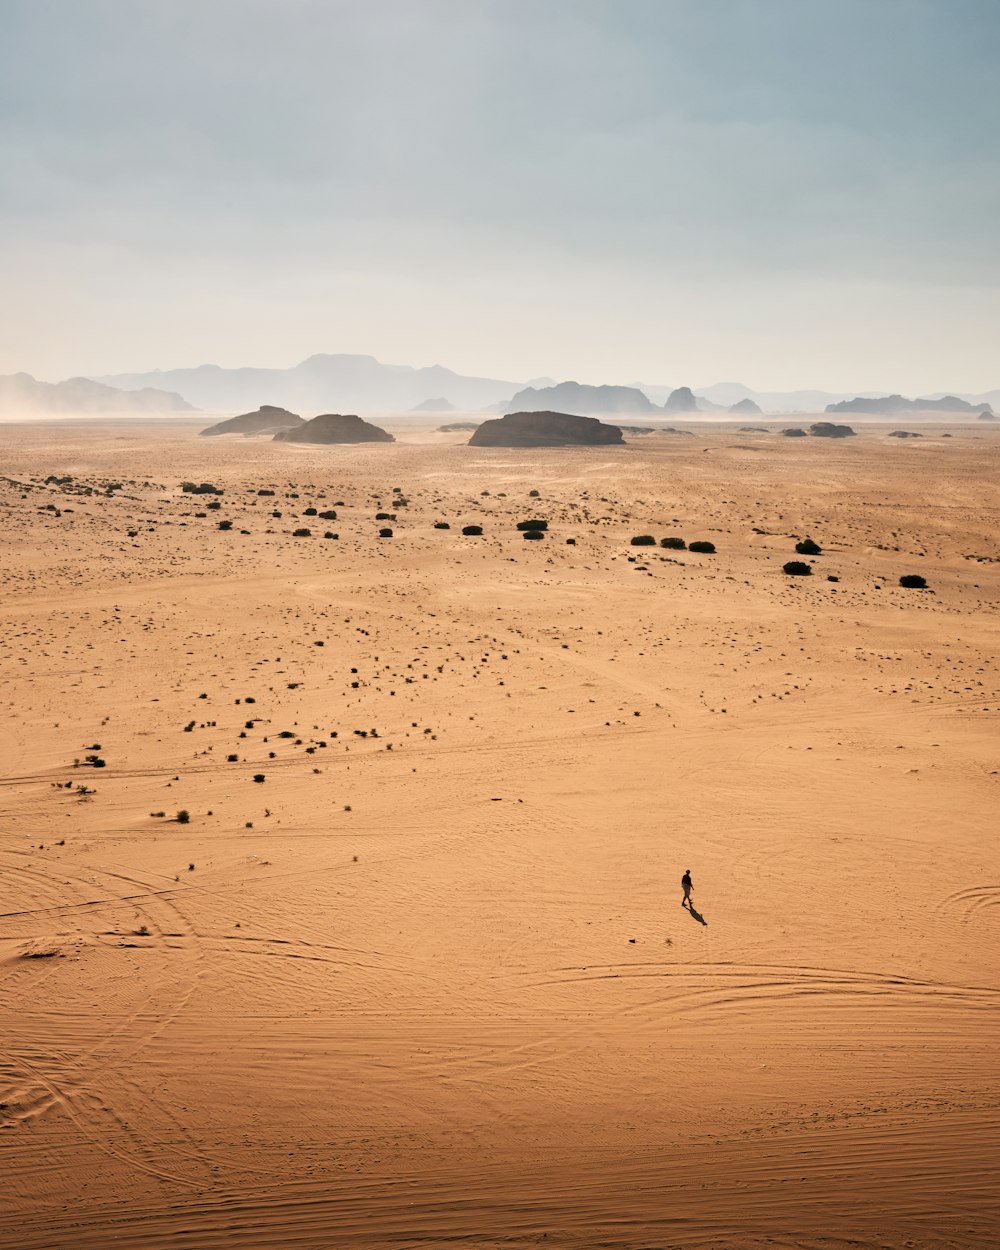 a person walking across a sandy field with mountains in the background